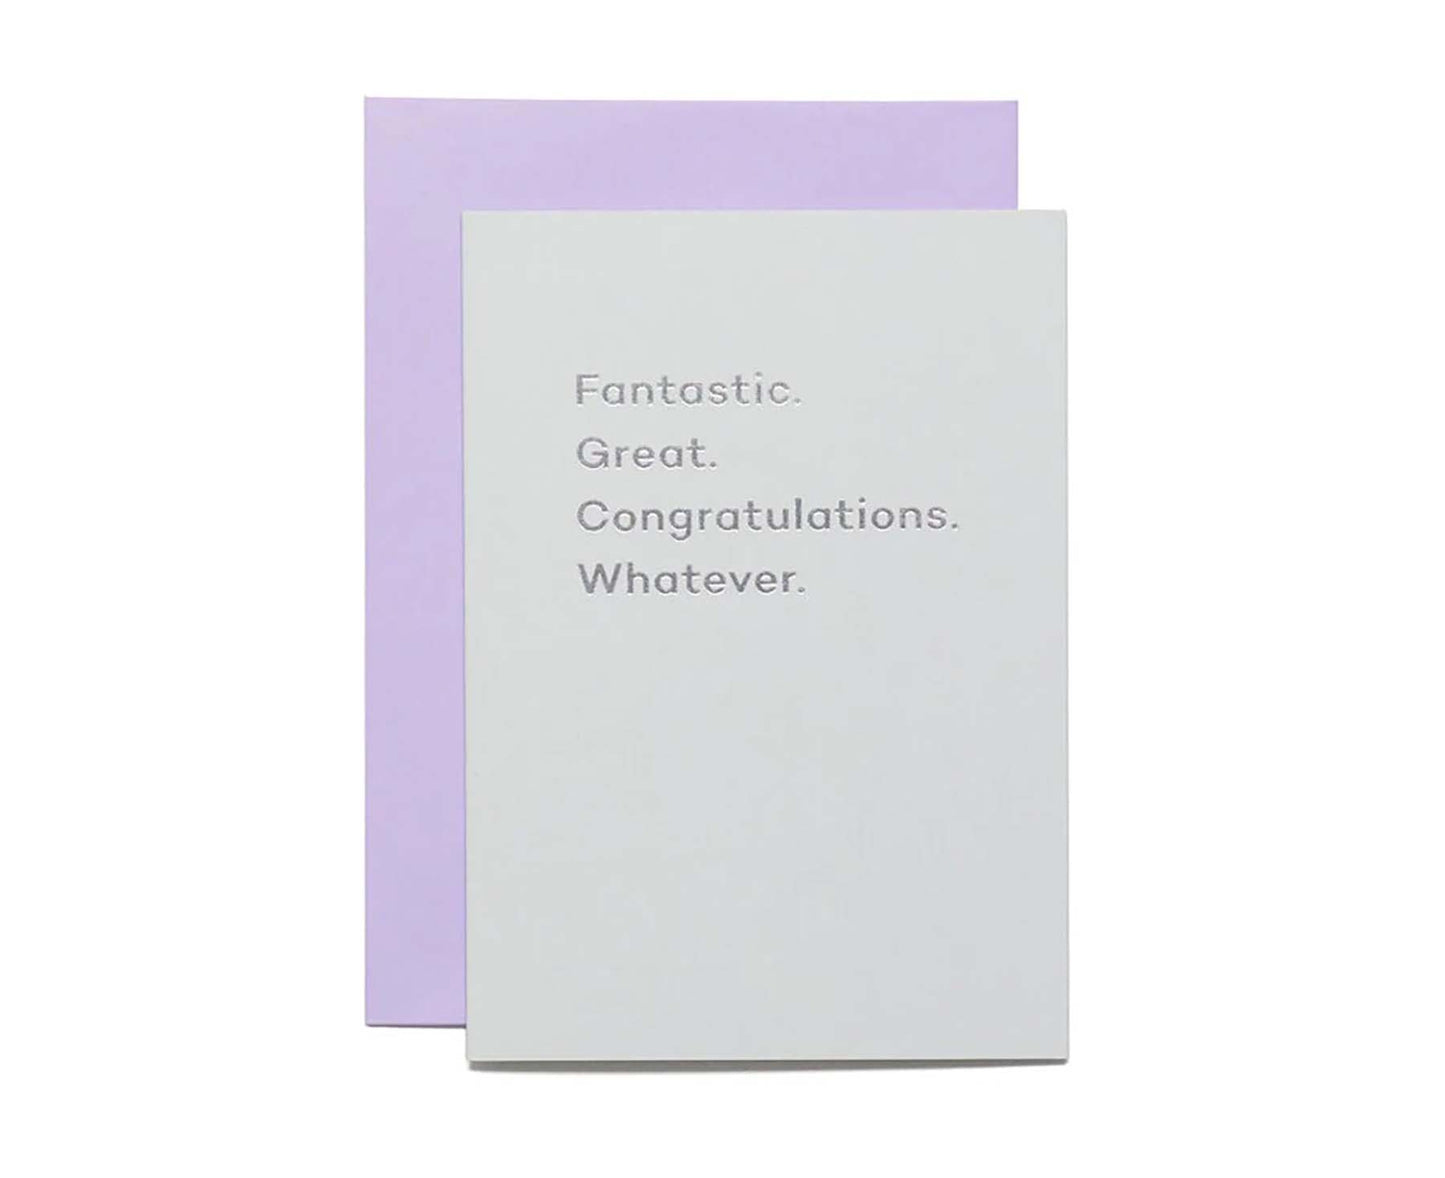 'Fantastic. Great. Congratulations. Whatever.' Foiled card